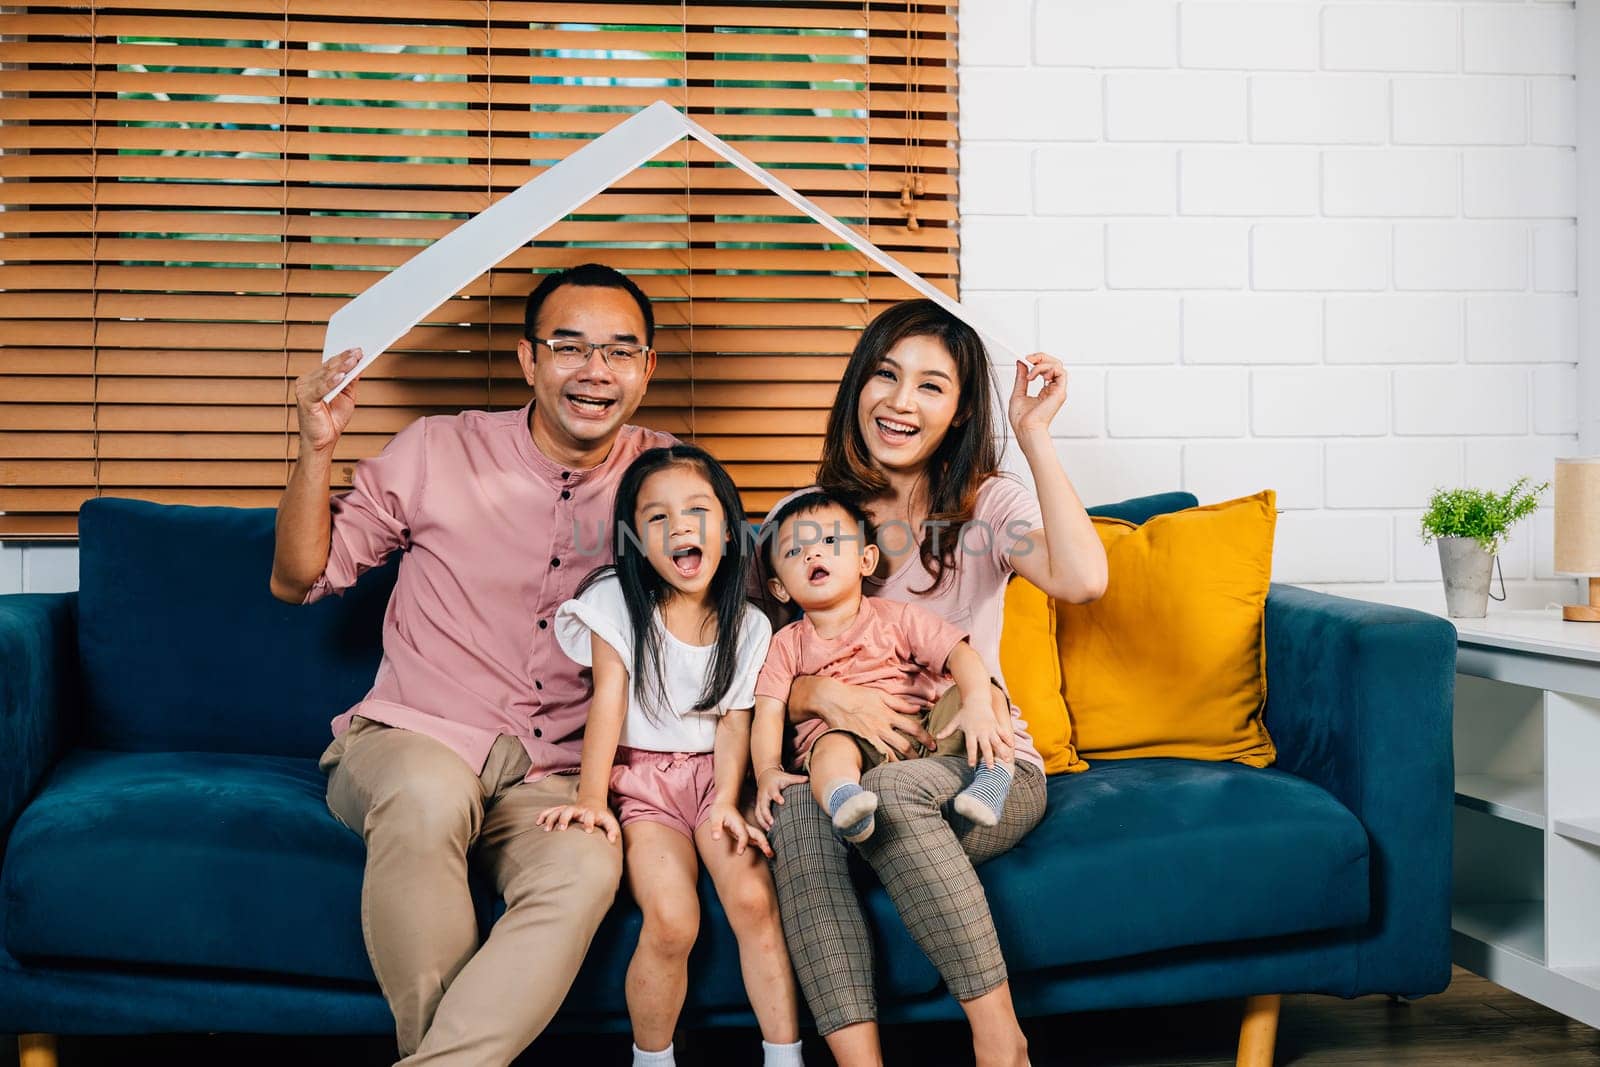 A joyful family enjoys the warmth of their cozy living room holding a cardboard roof mockup symbolizing protection and planning during their home relocation. Safety and togetherness is the answer.